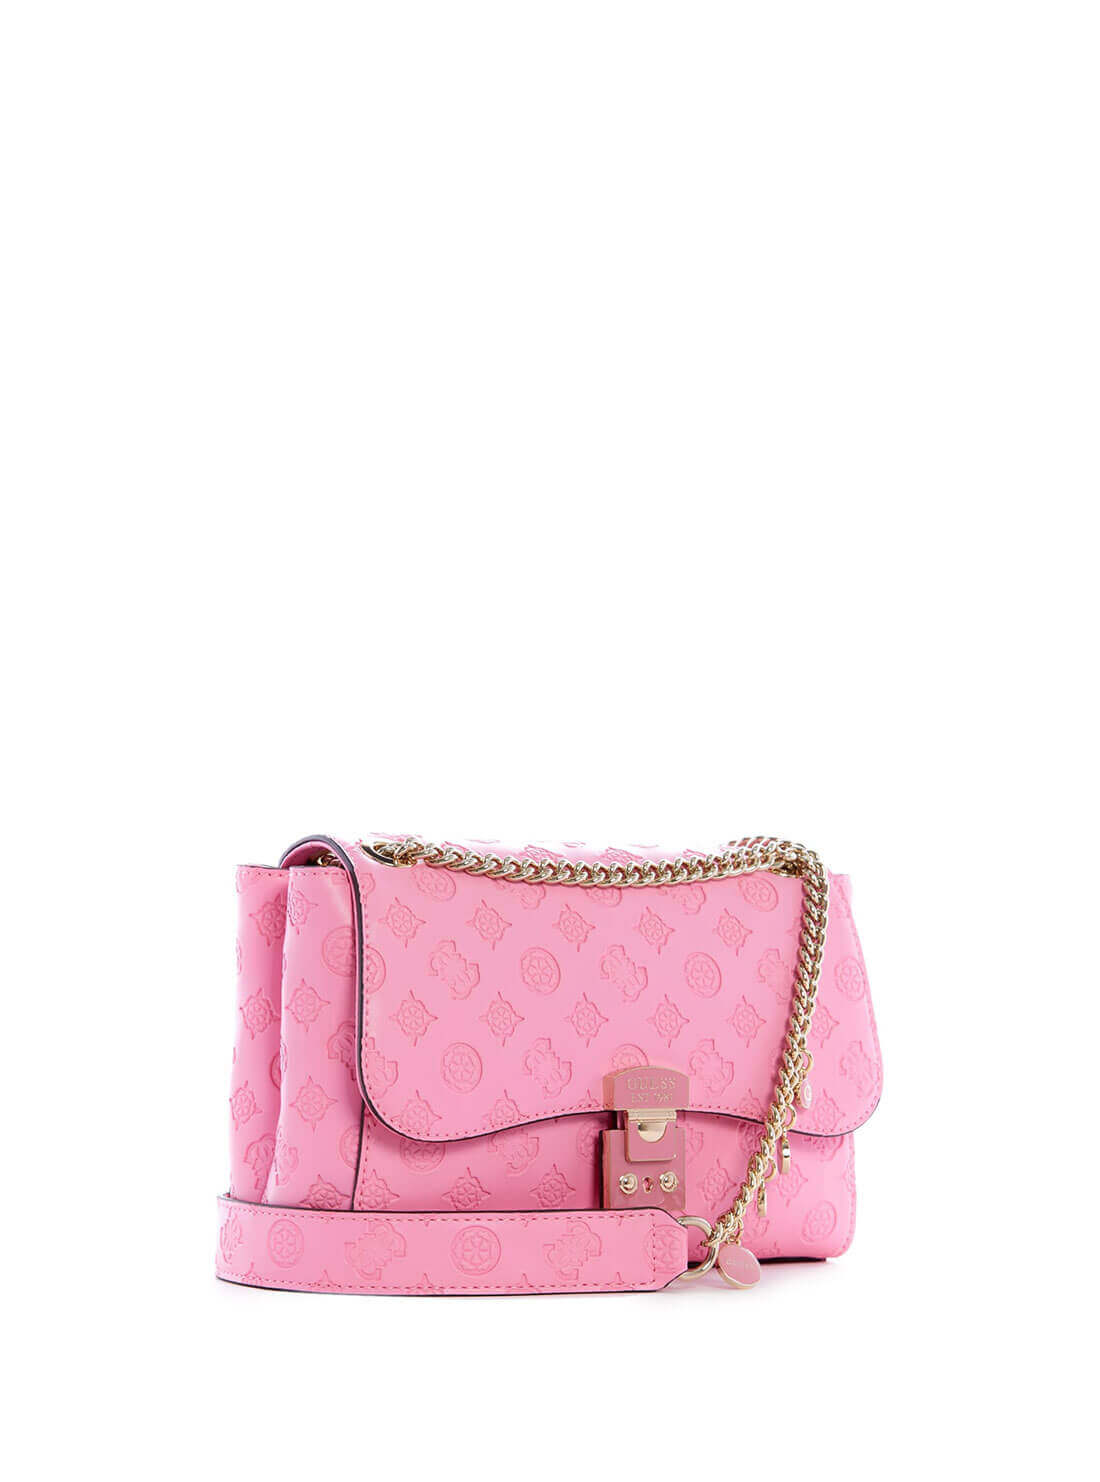 GUESS Womens  Pink Carlson Convertible Crossbody PG839821 Front Side View